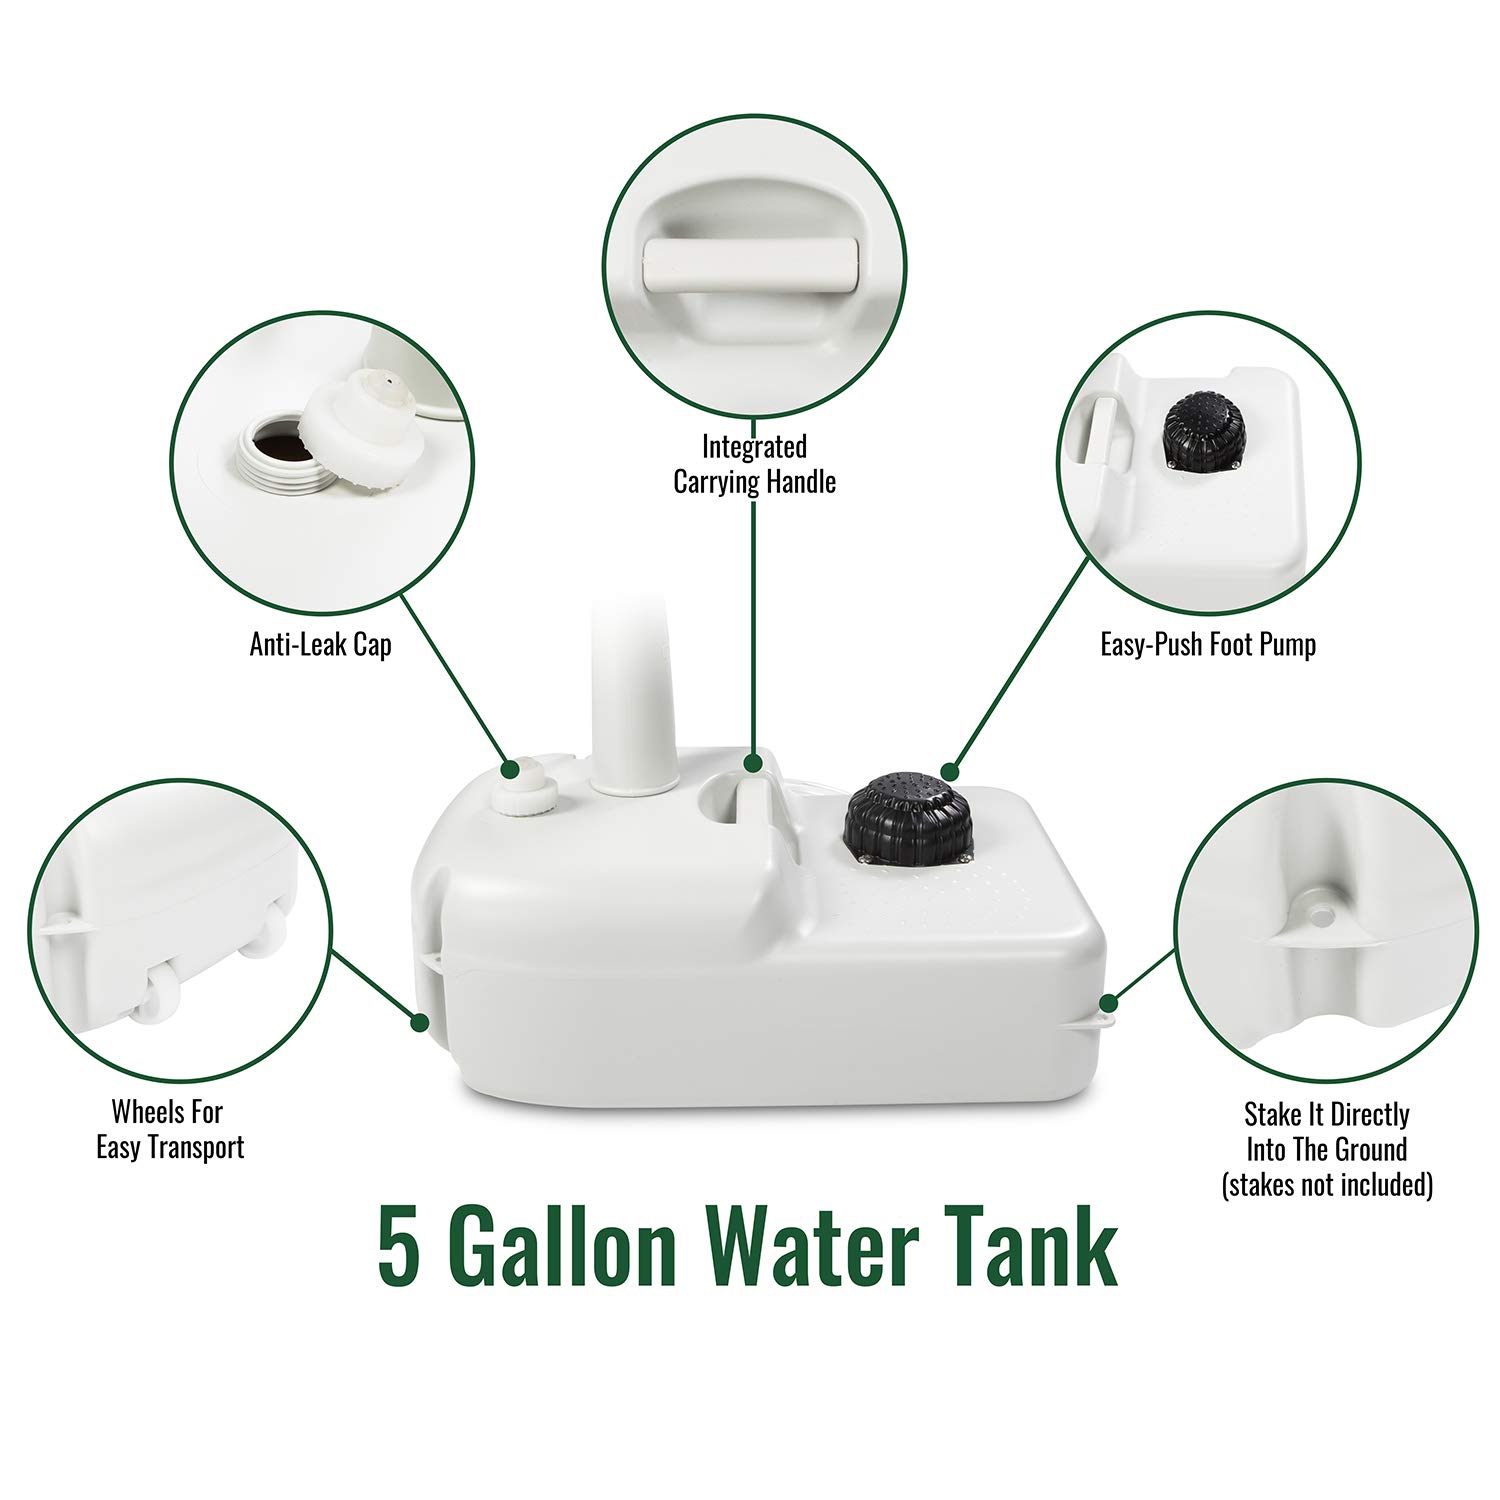 Outsunny 19.8 Gallon RV Water Tank, Portable Waste Water Tank for